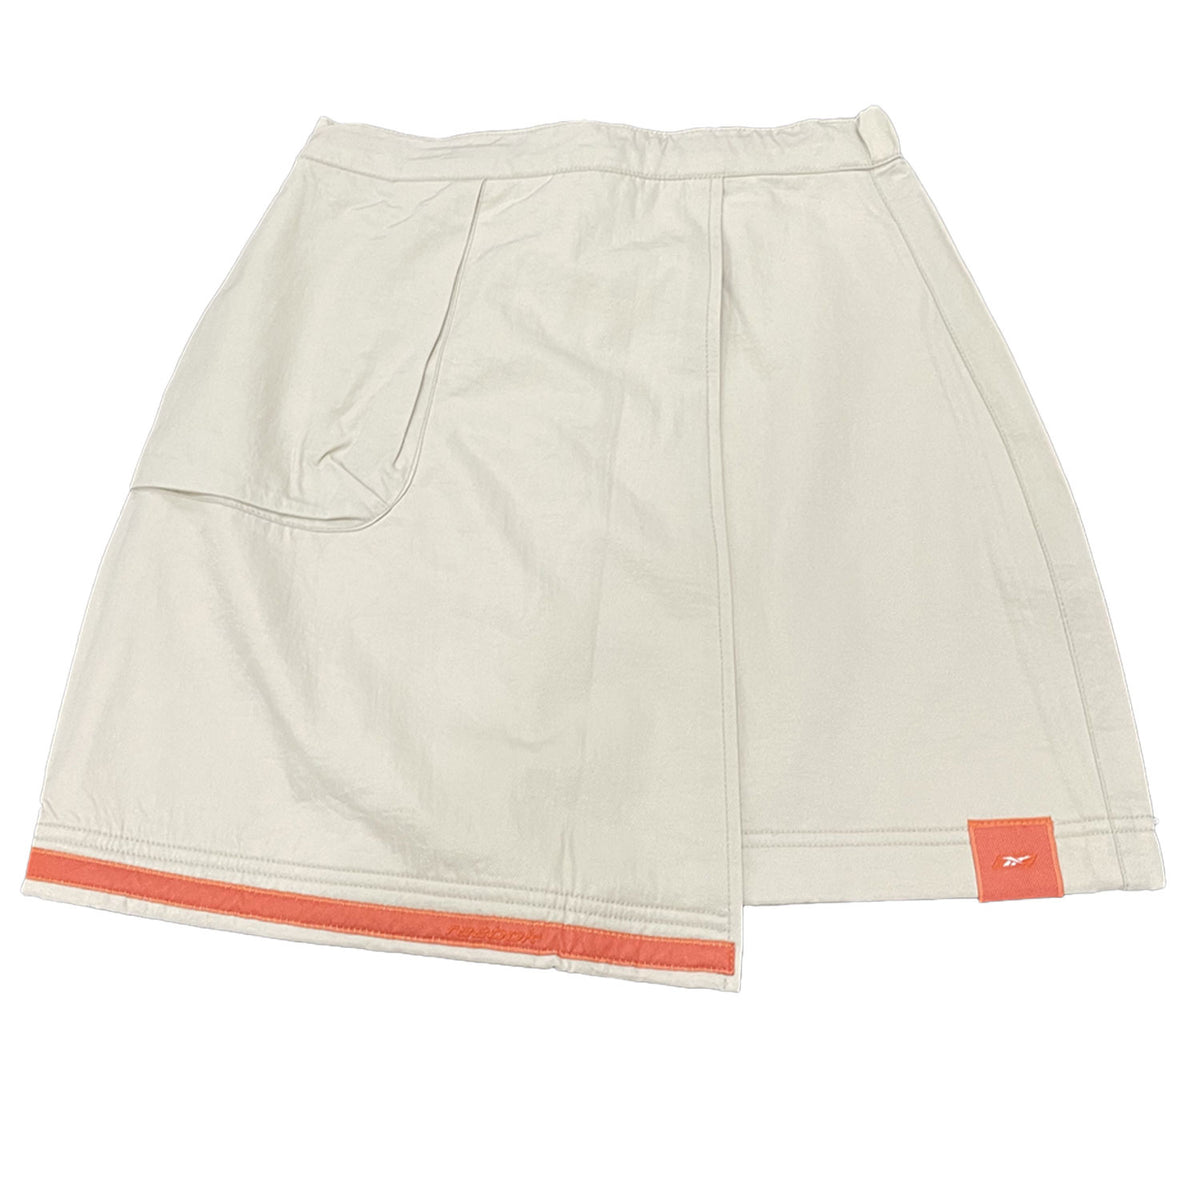 Reebok Womens Lined Freestyle Skirt - RRP £19.99